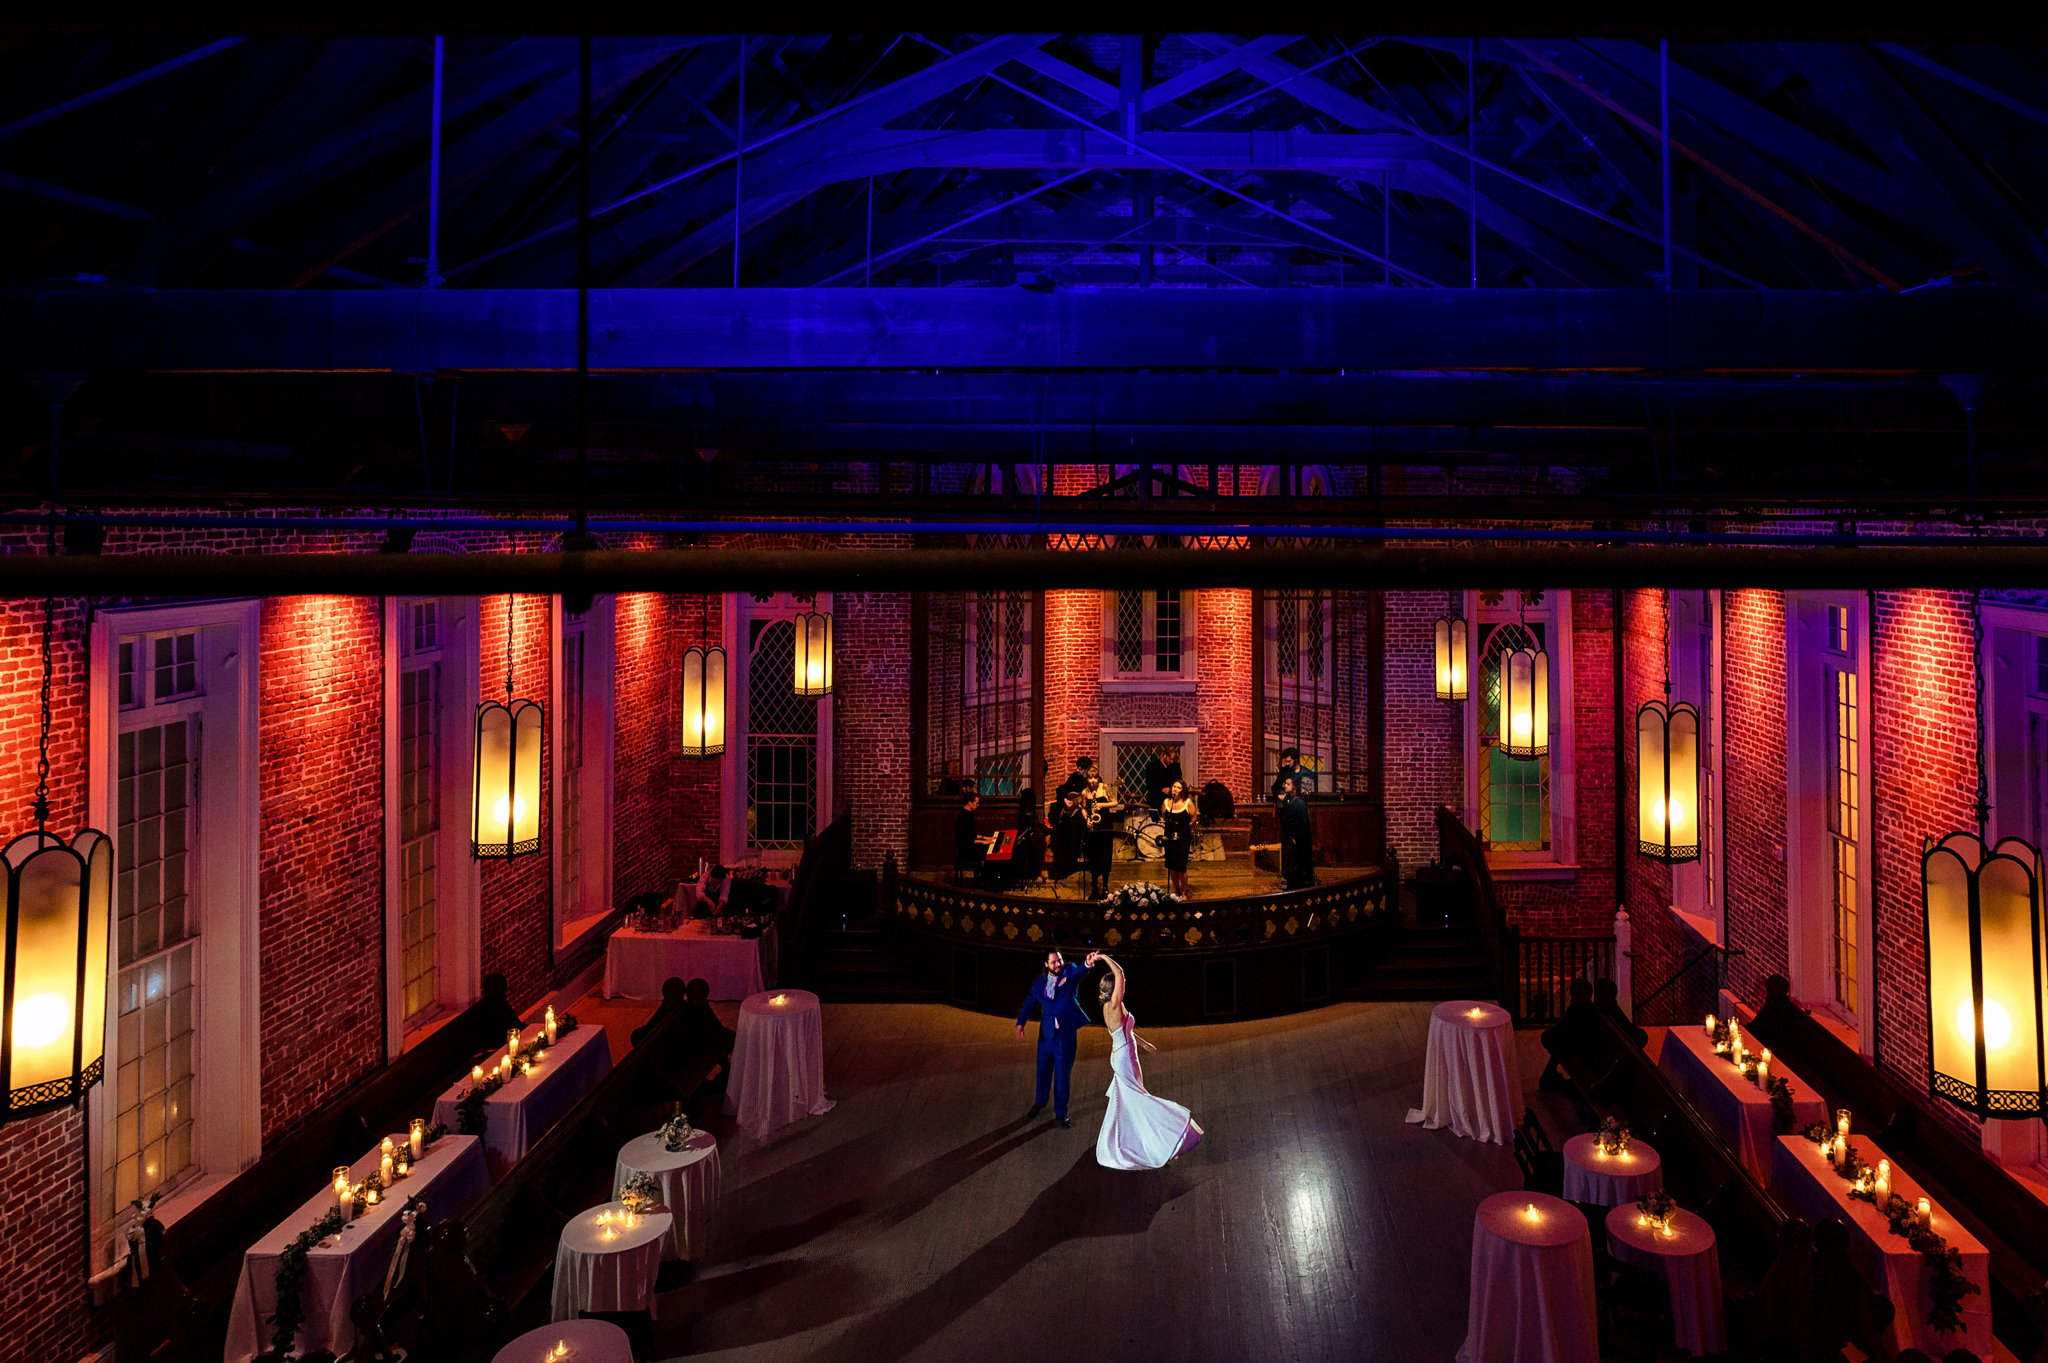 A felicity church wedding in New Orleans with a bride and groom standing in a dark room.